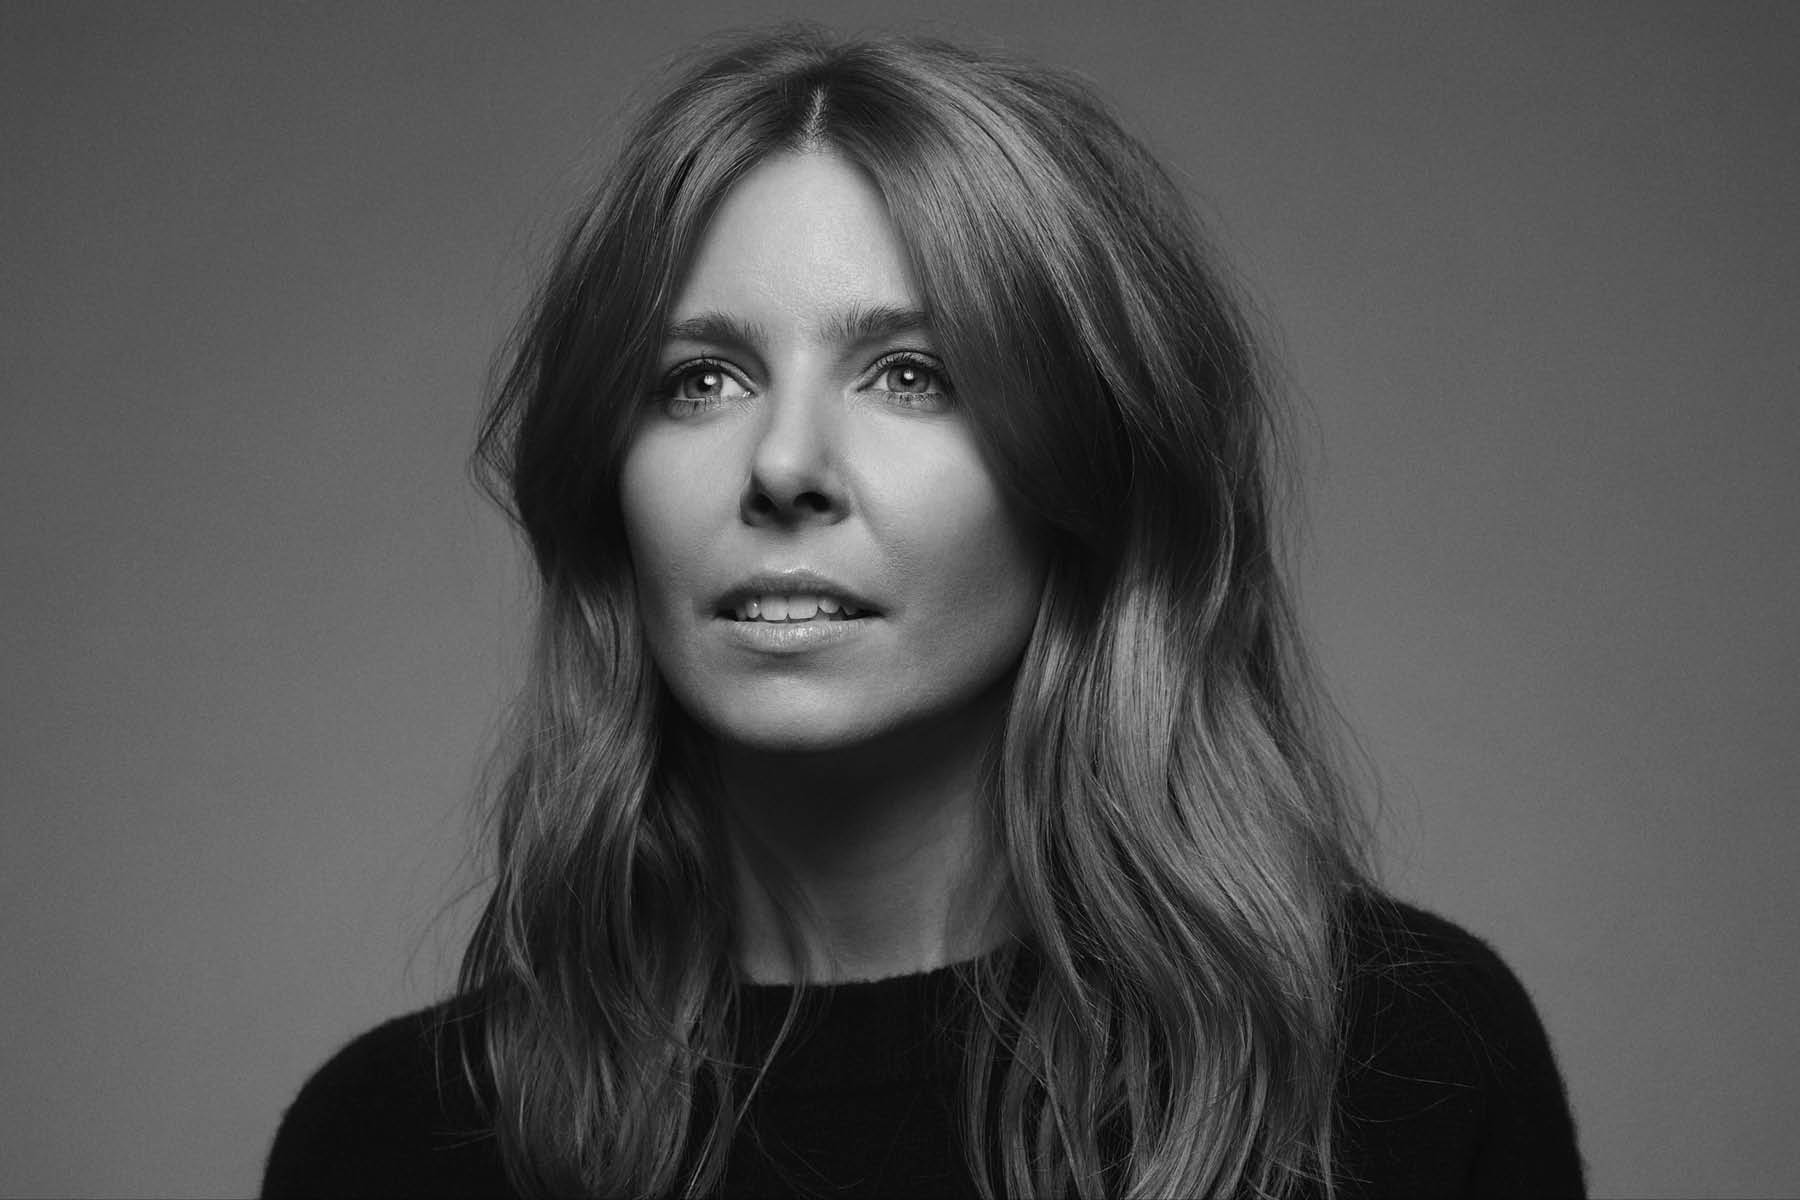 A photograph of Stacey Dooley